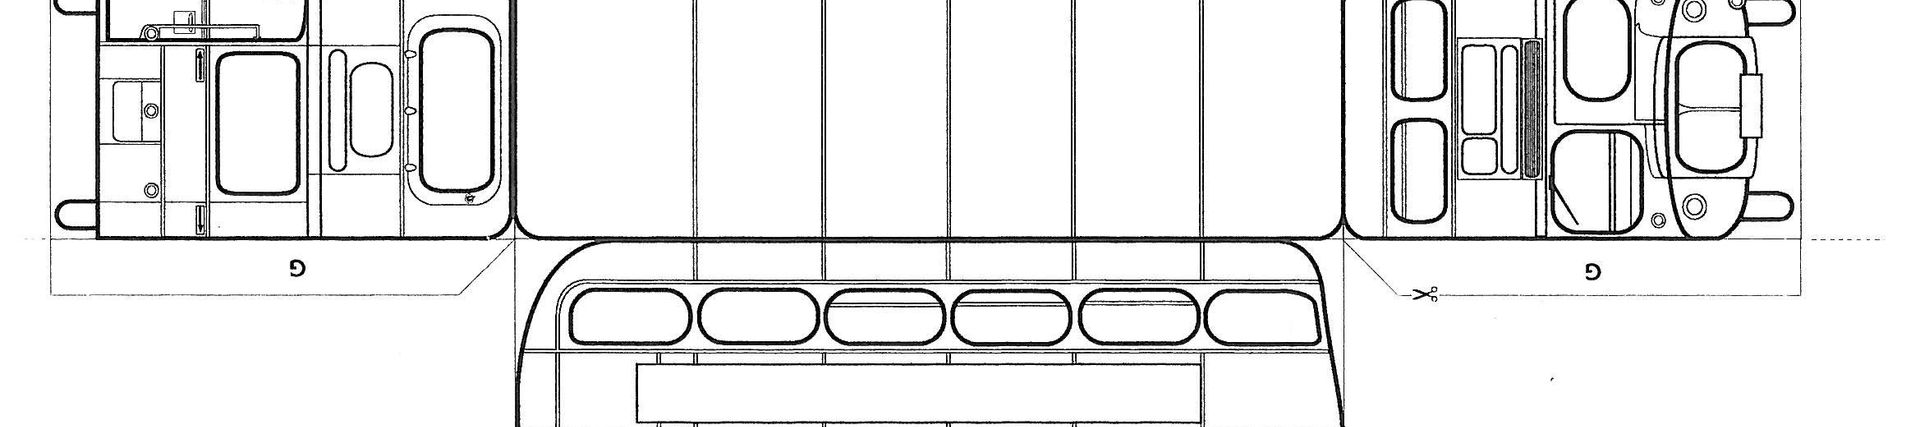 Routemaster bus template